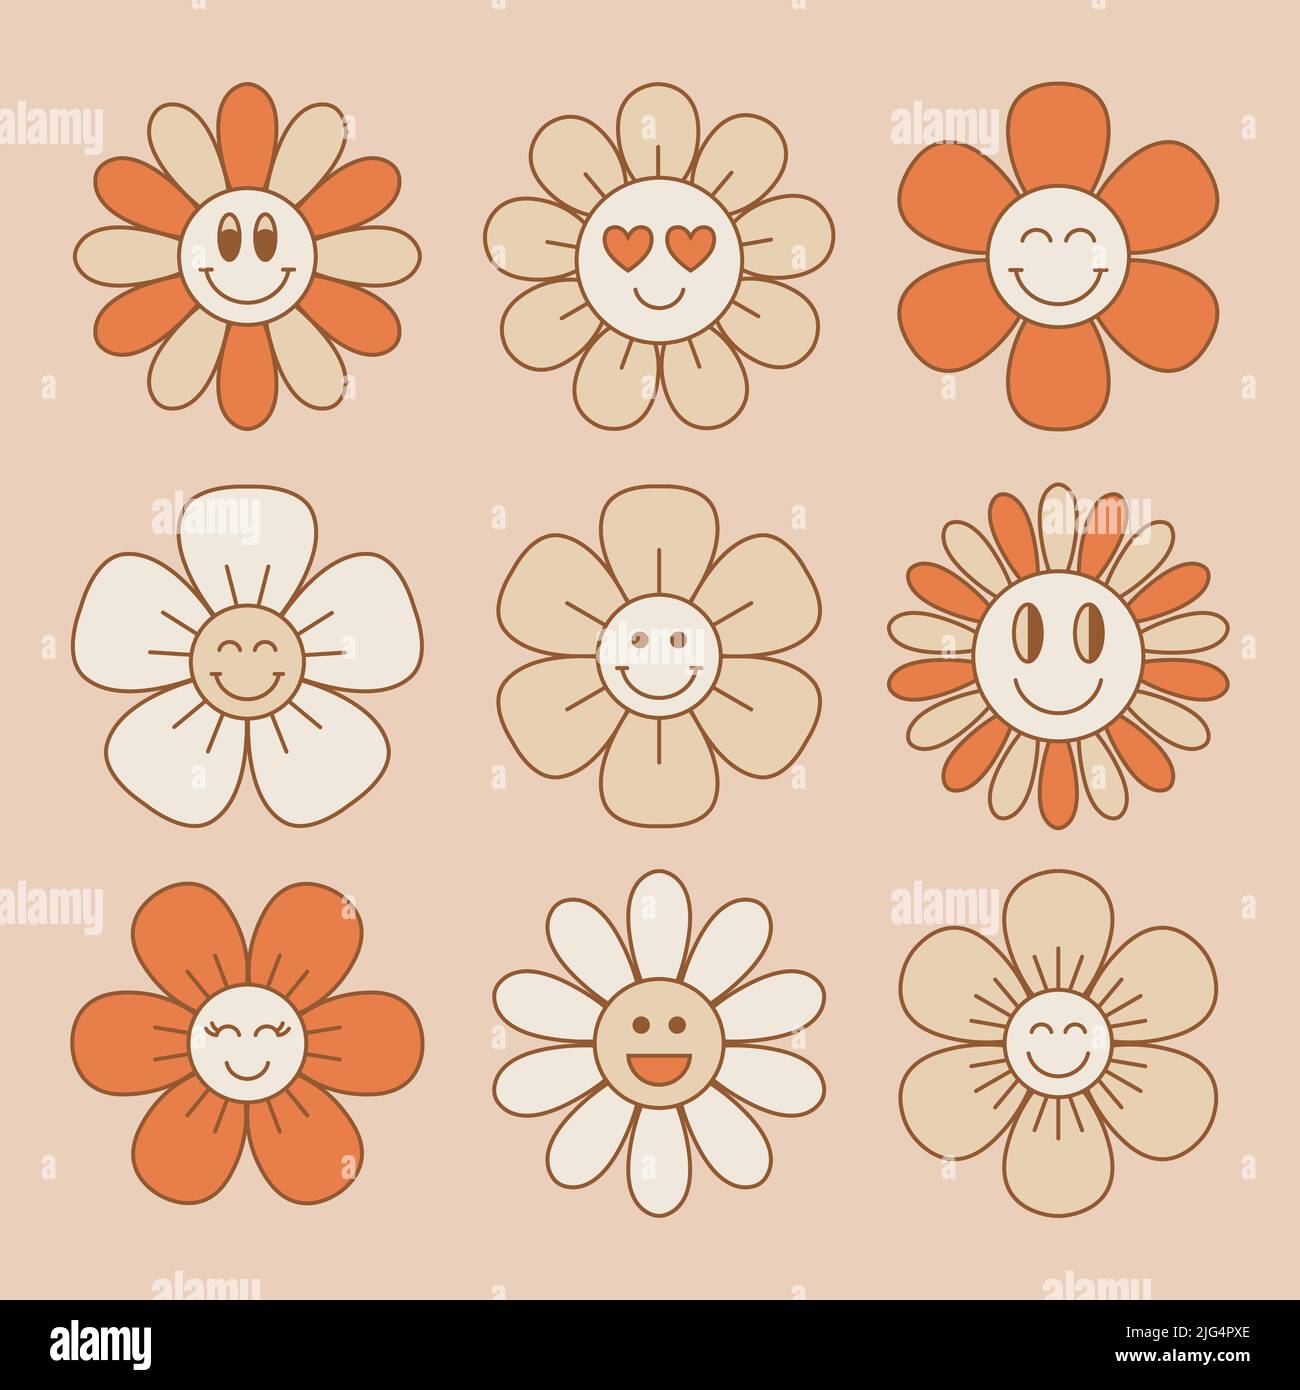 Cute and smiling flower collection in retro 70s style. Vintage floral patches. Vector illustration. Stock Vector